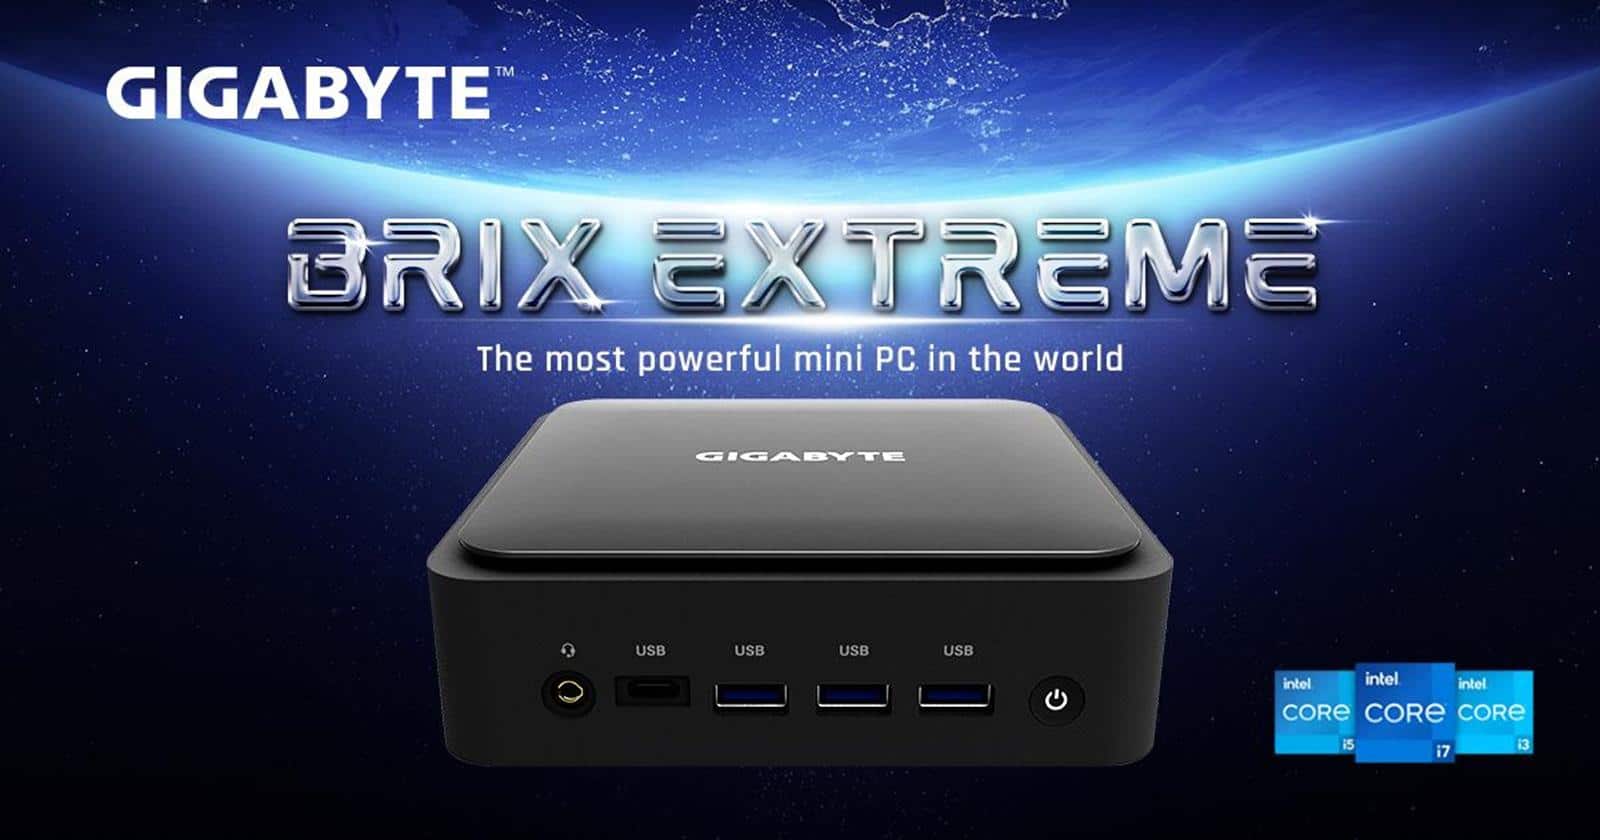 The Gigabyte BRIX Extreme miniature computer is said to be the most powerful in the world